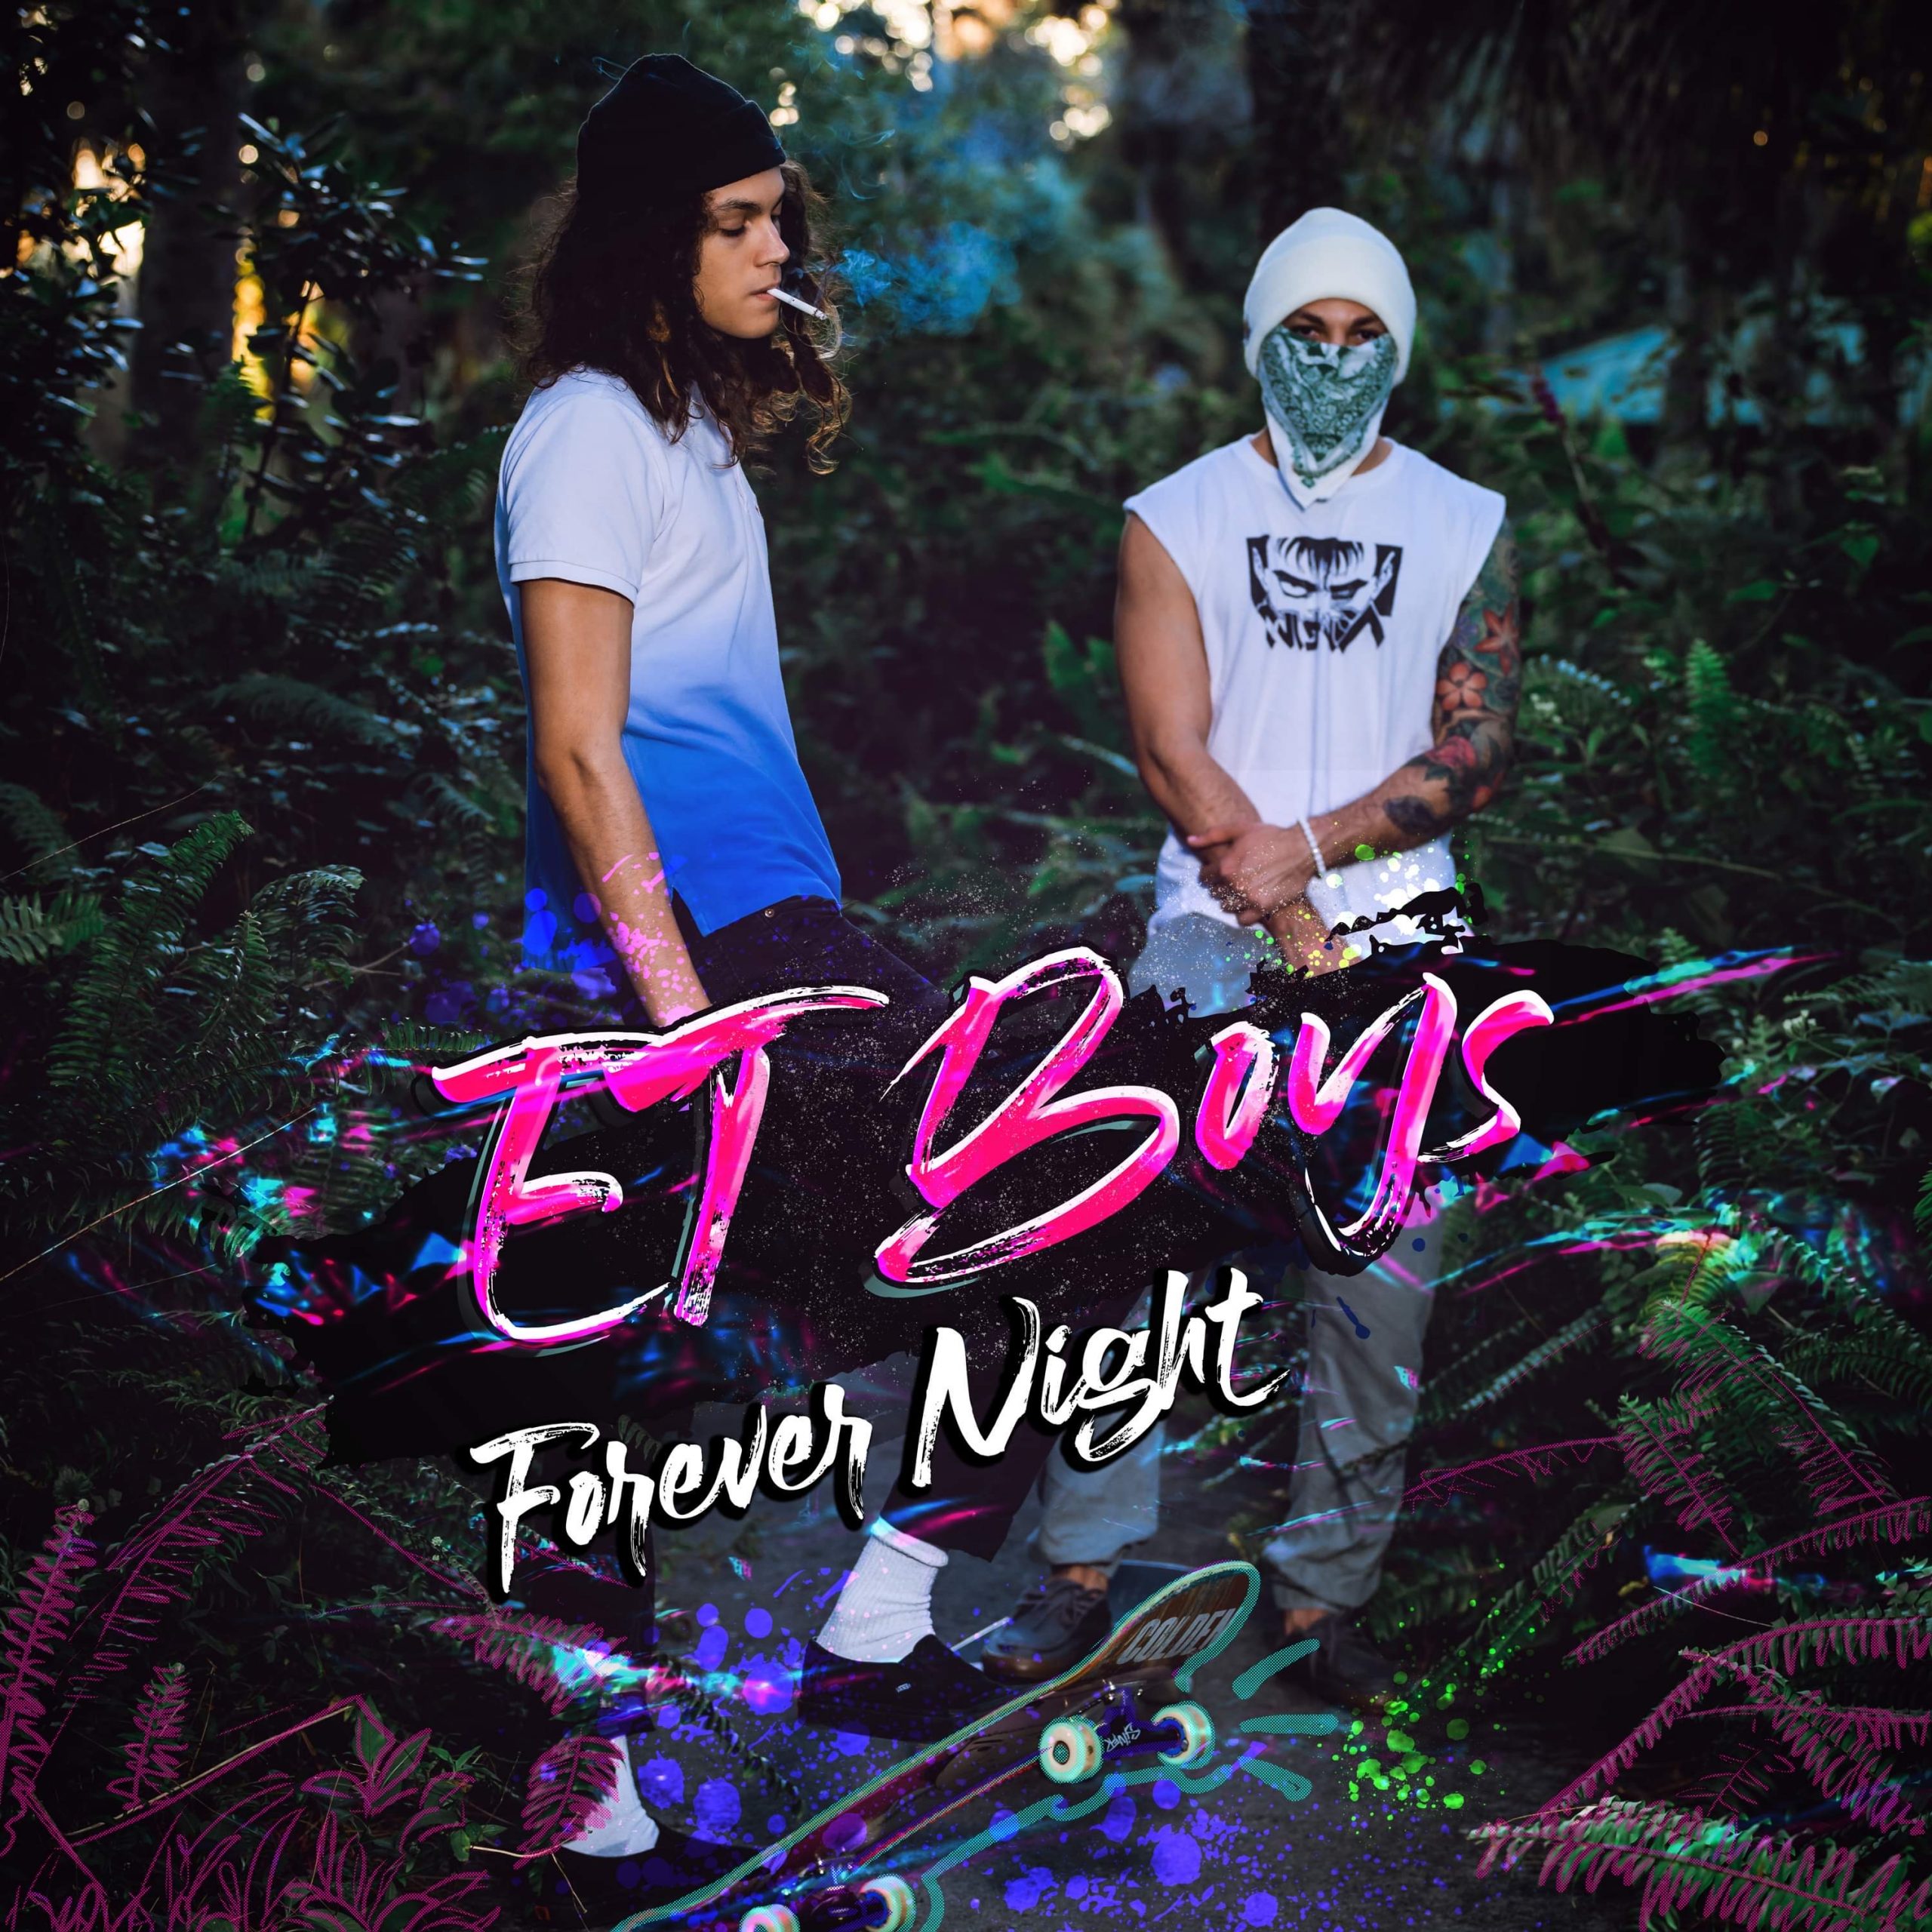 Capturing some of their finest work to date, ‘THE ET BOYS’ unveil Nu Pop Electronic Melodic Rap album ‘Forever Night’.